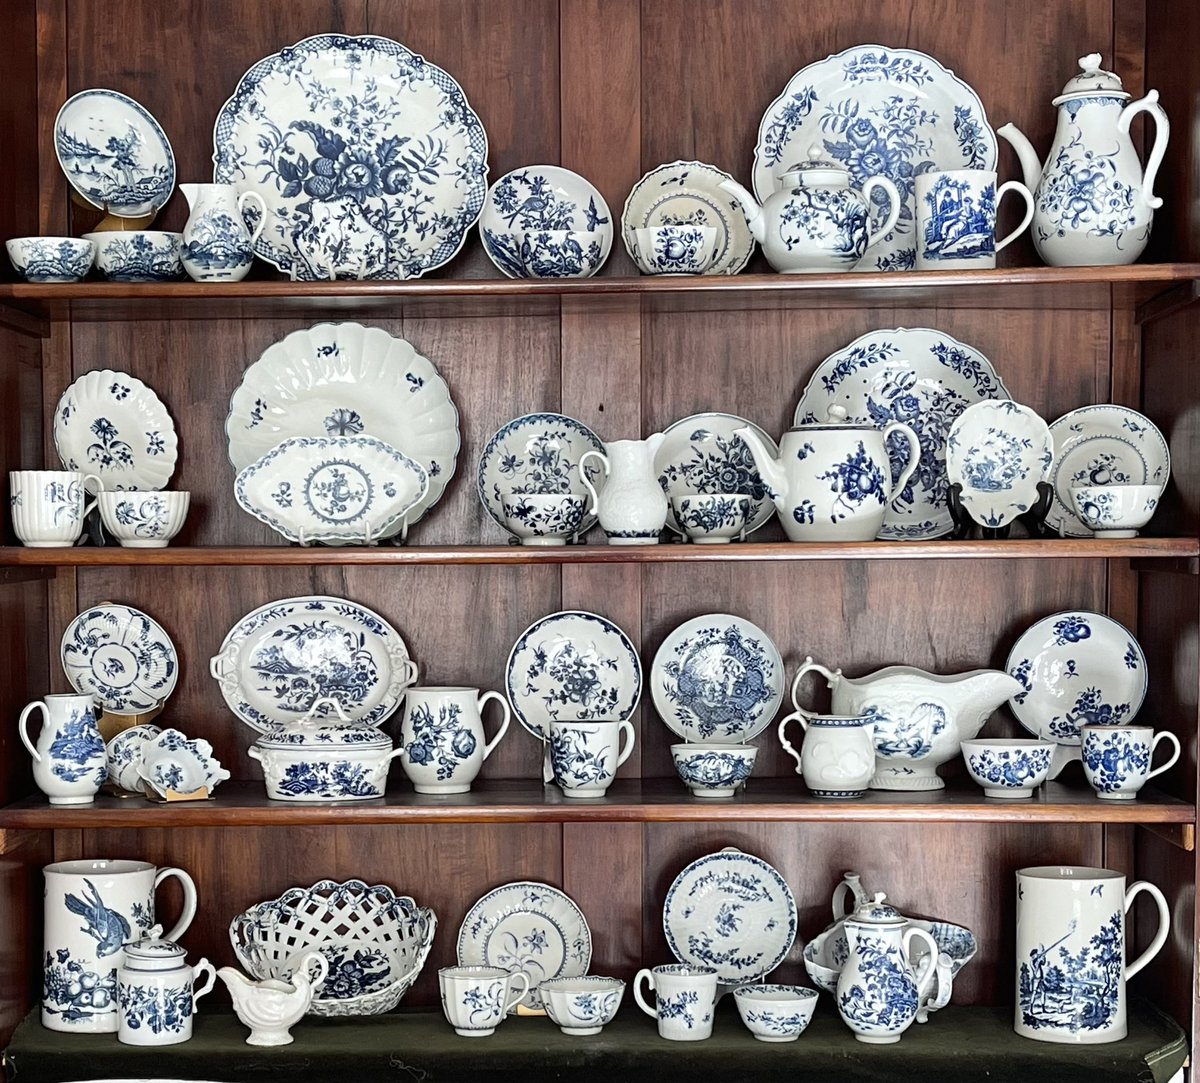 A fabulous collection of 18th Century Worcester Porcelain - made just yards from my Worcester Office. Coming up in November. Part 1